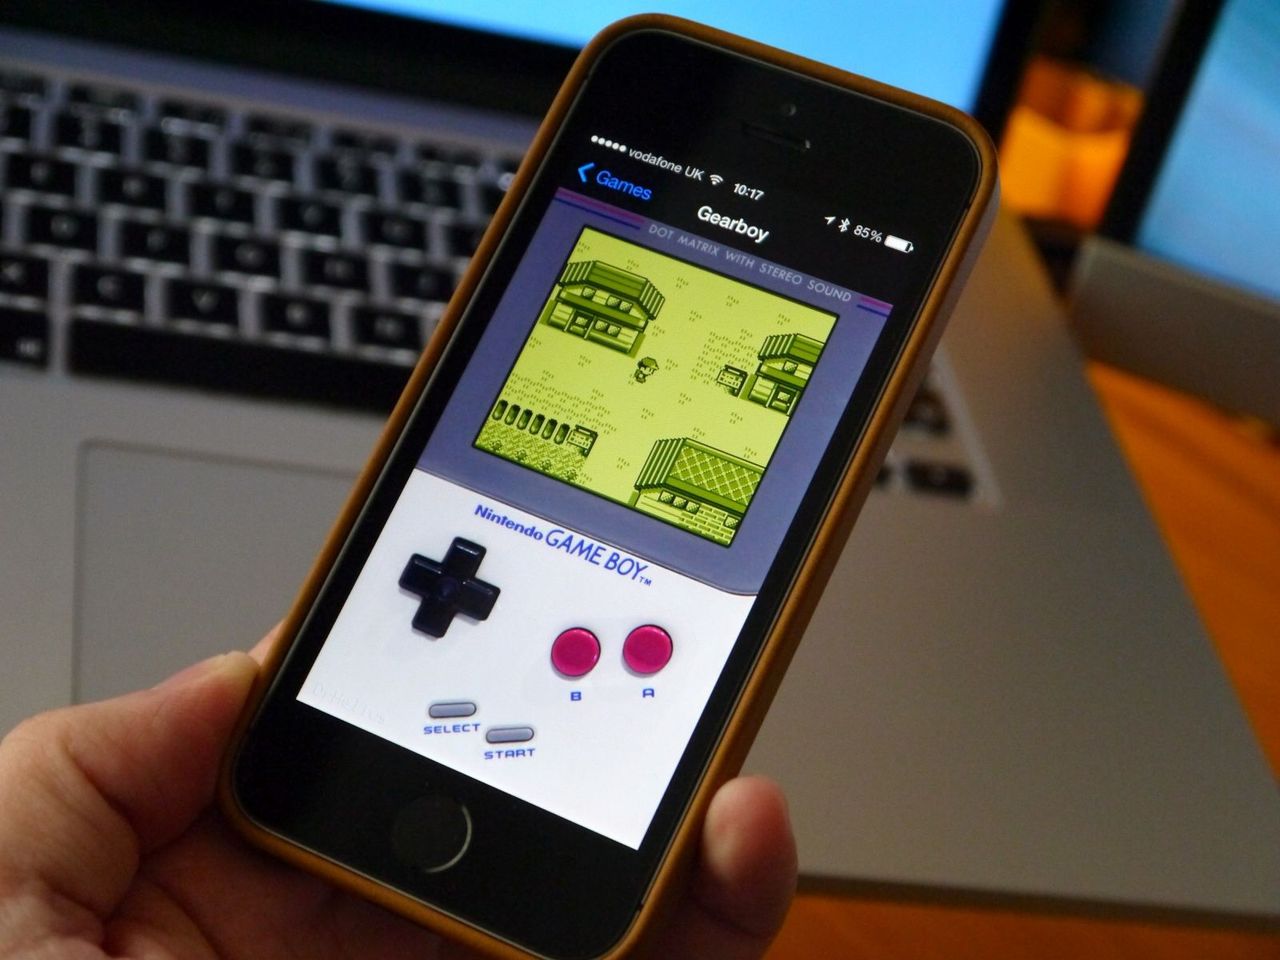 iphone pc emulator for games